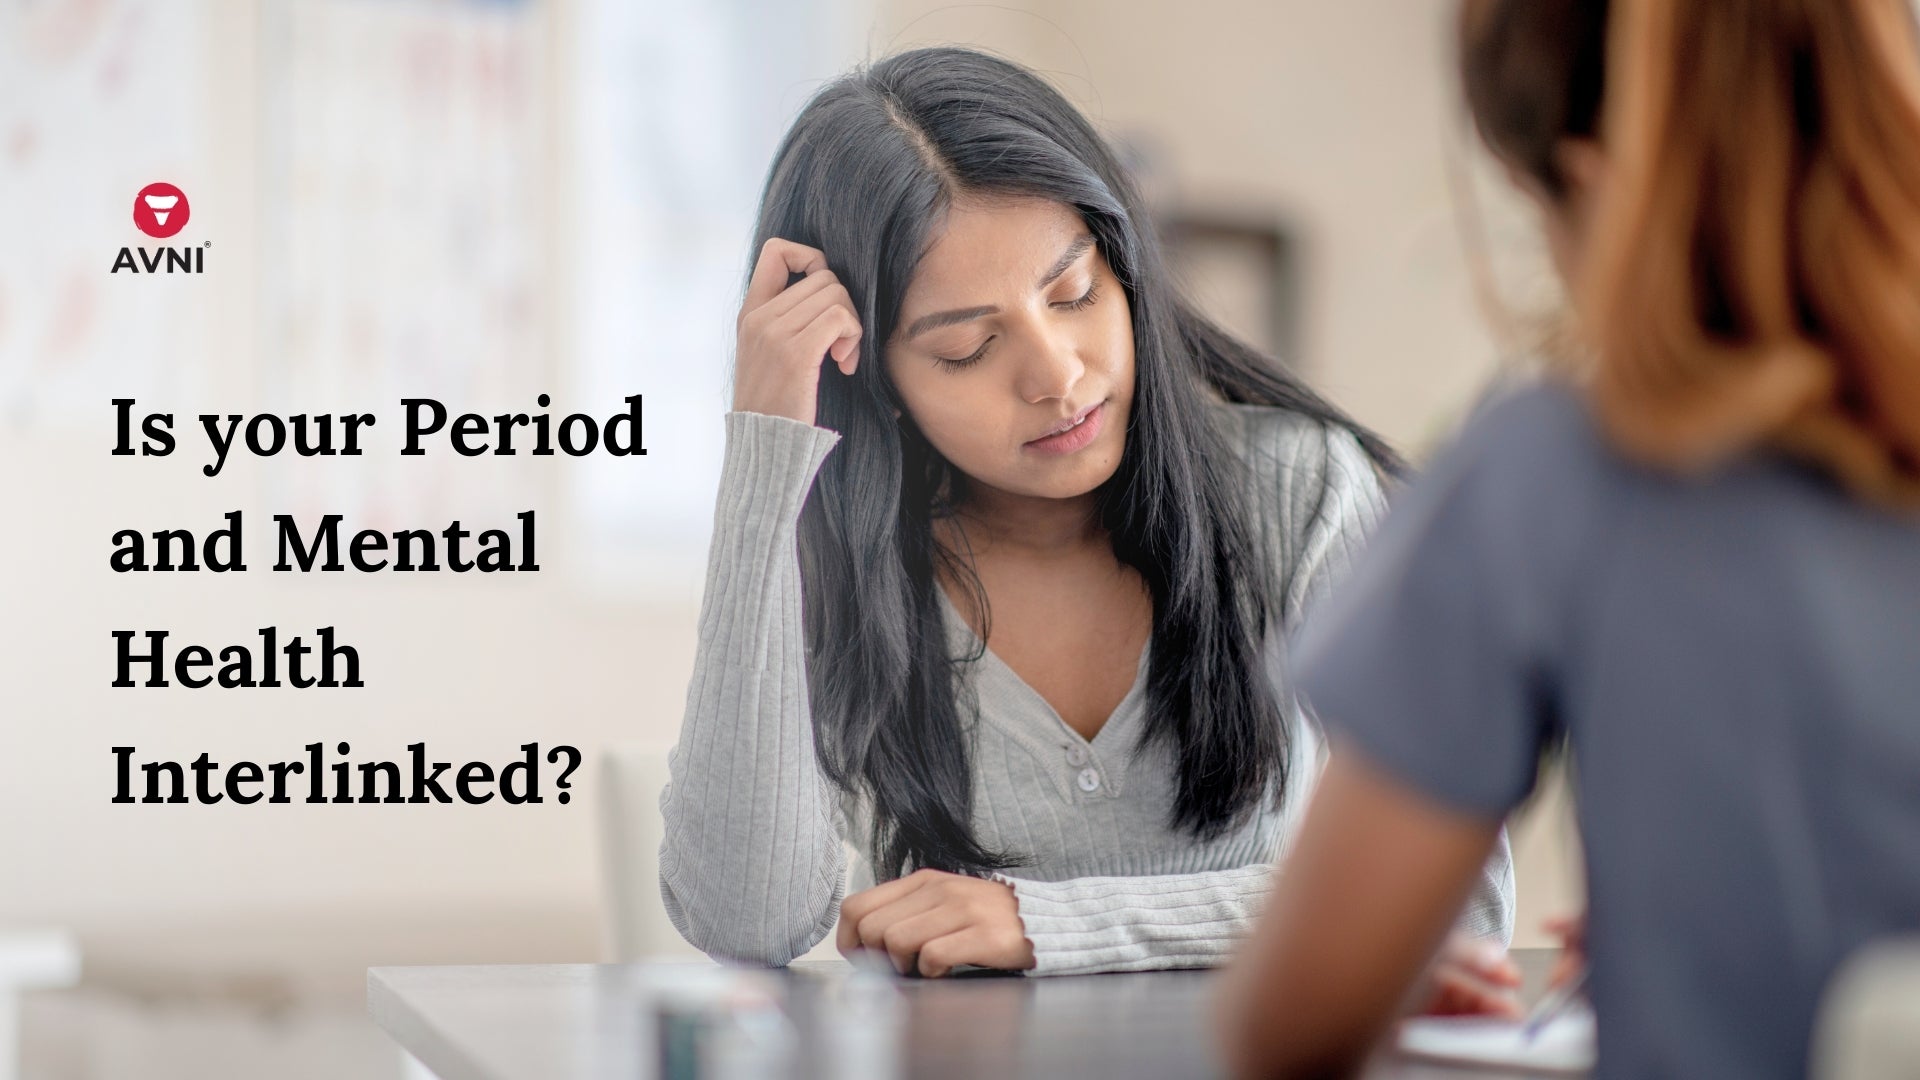 Is your Period and Mental Health Interlinked?